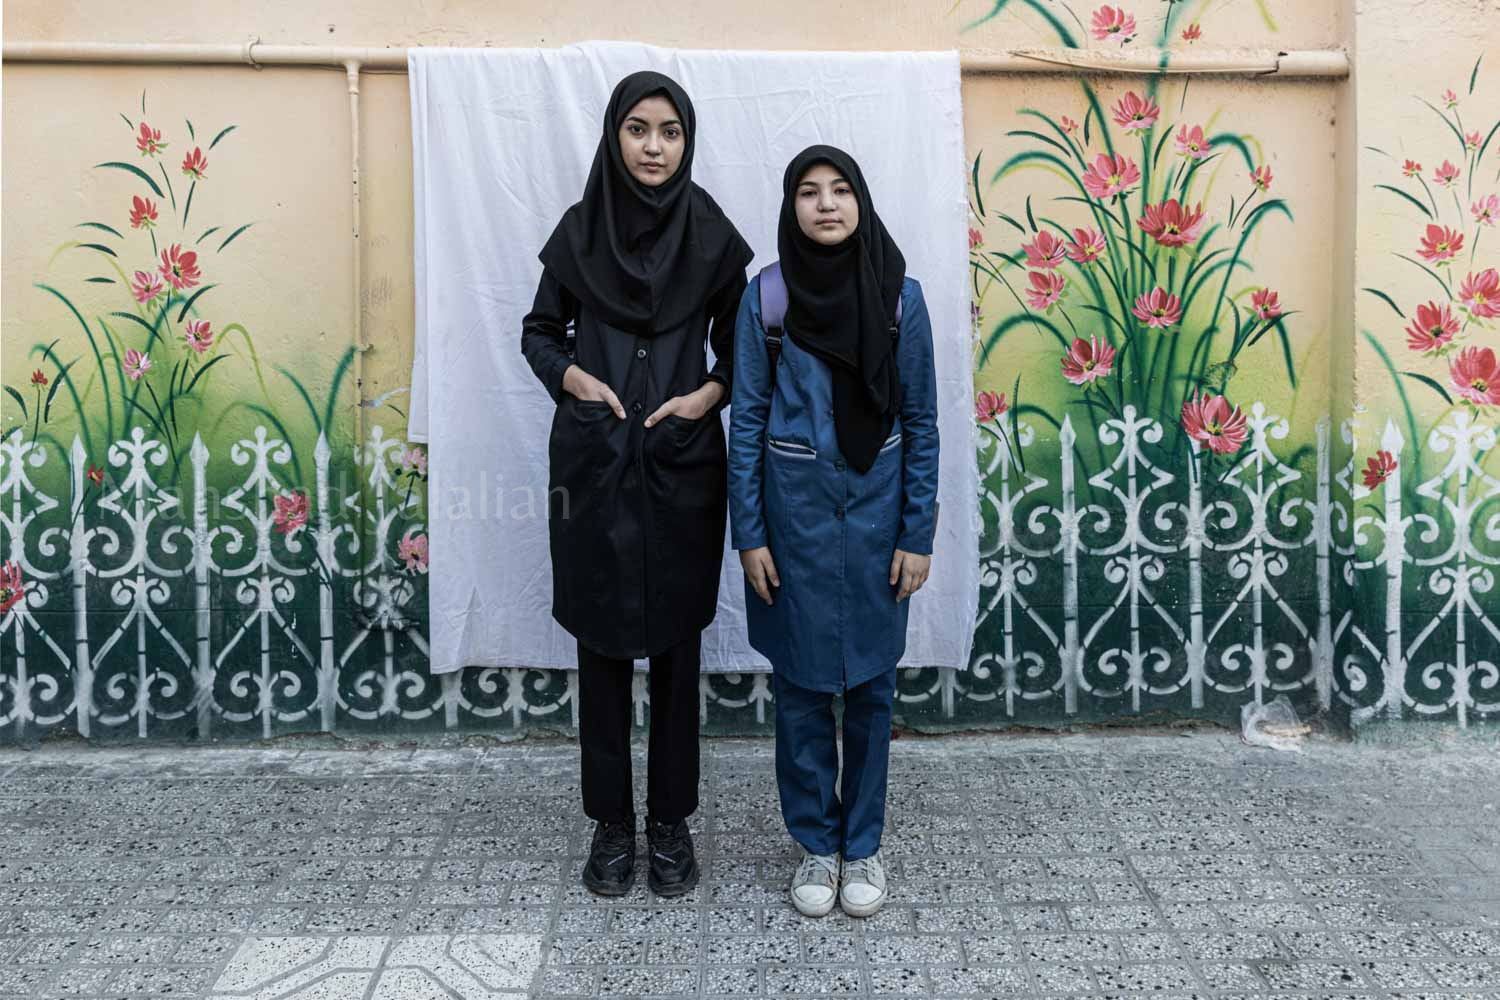 Nora 10-year-old and Zahra 17-year-old moved 4 months from Dashtbarchi at Kabul, Afghanistan.